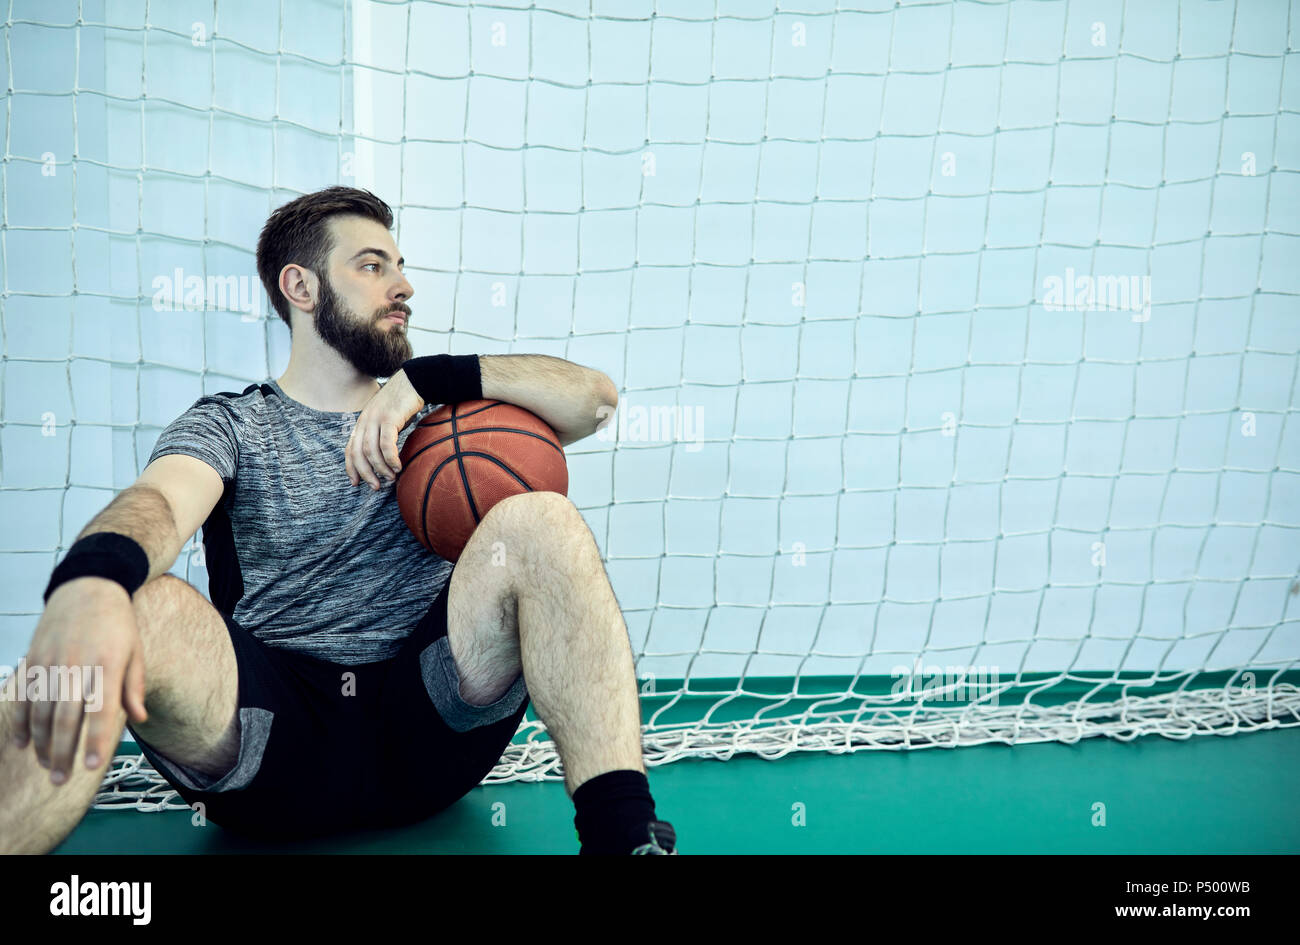 Man with basketball during break, indoor Stock Photo